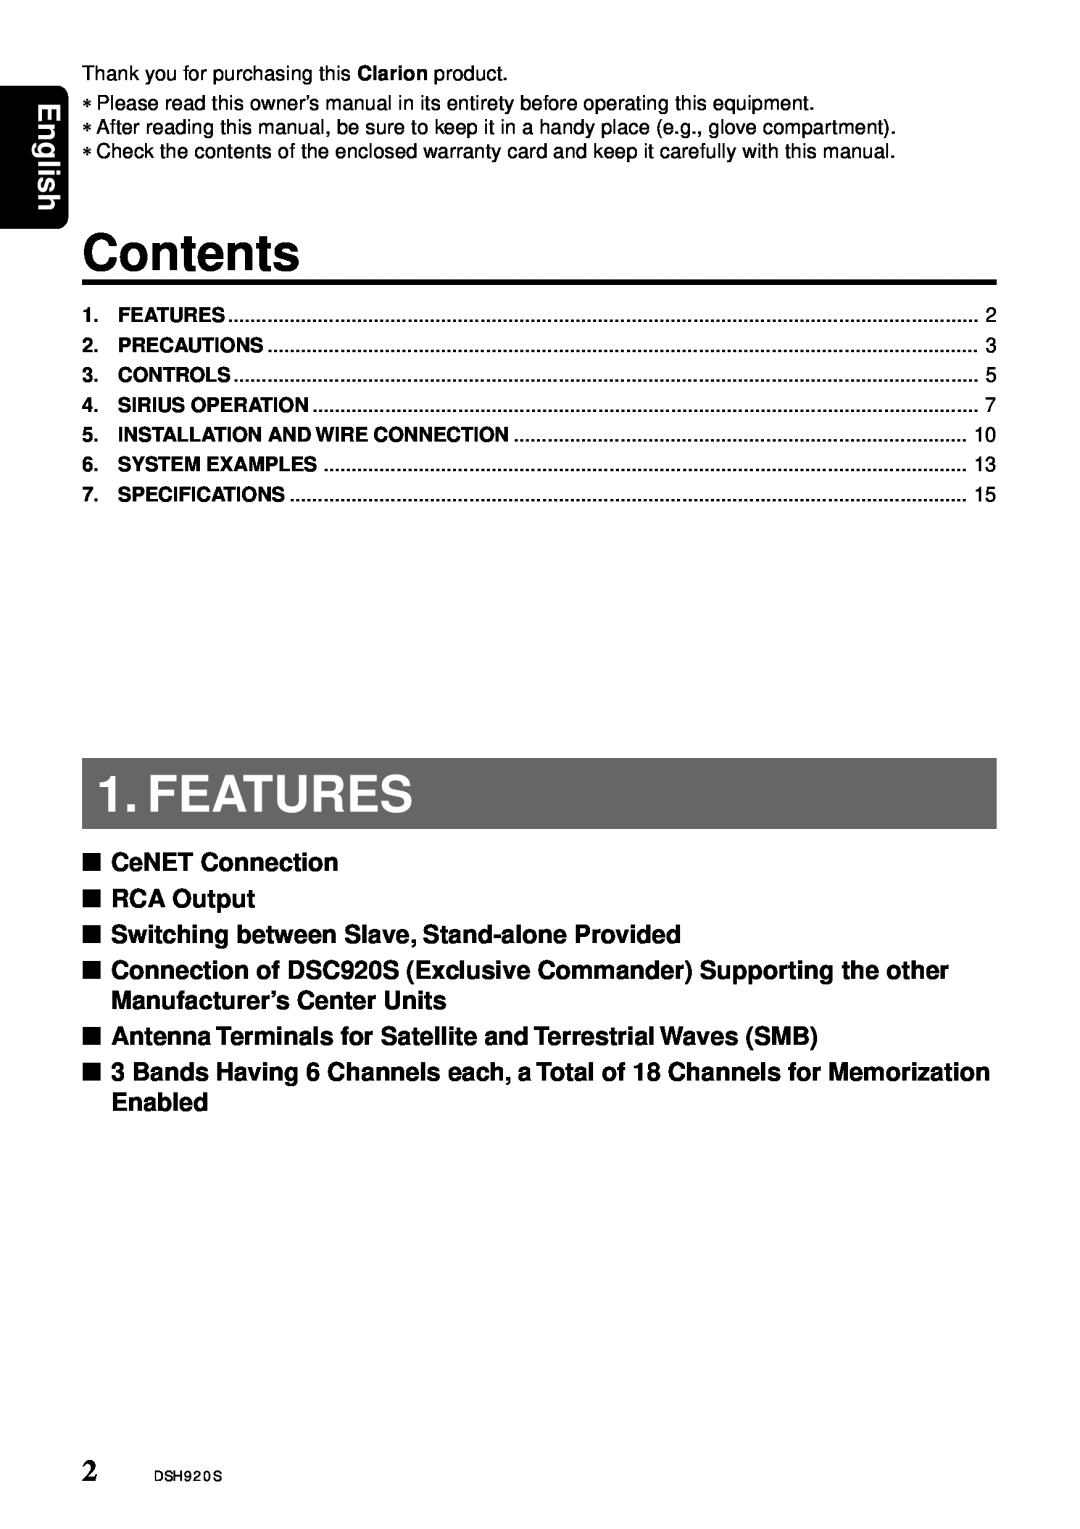 Clarion DSH920S owner manual Features, English, Contents 